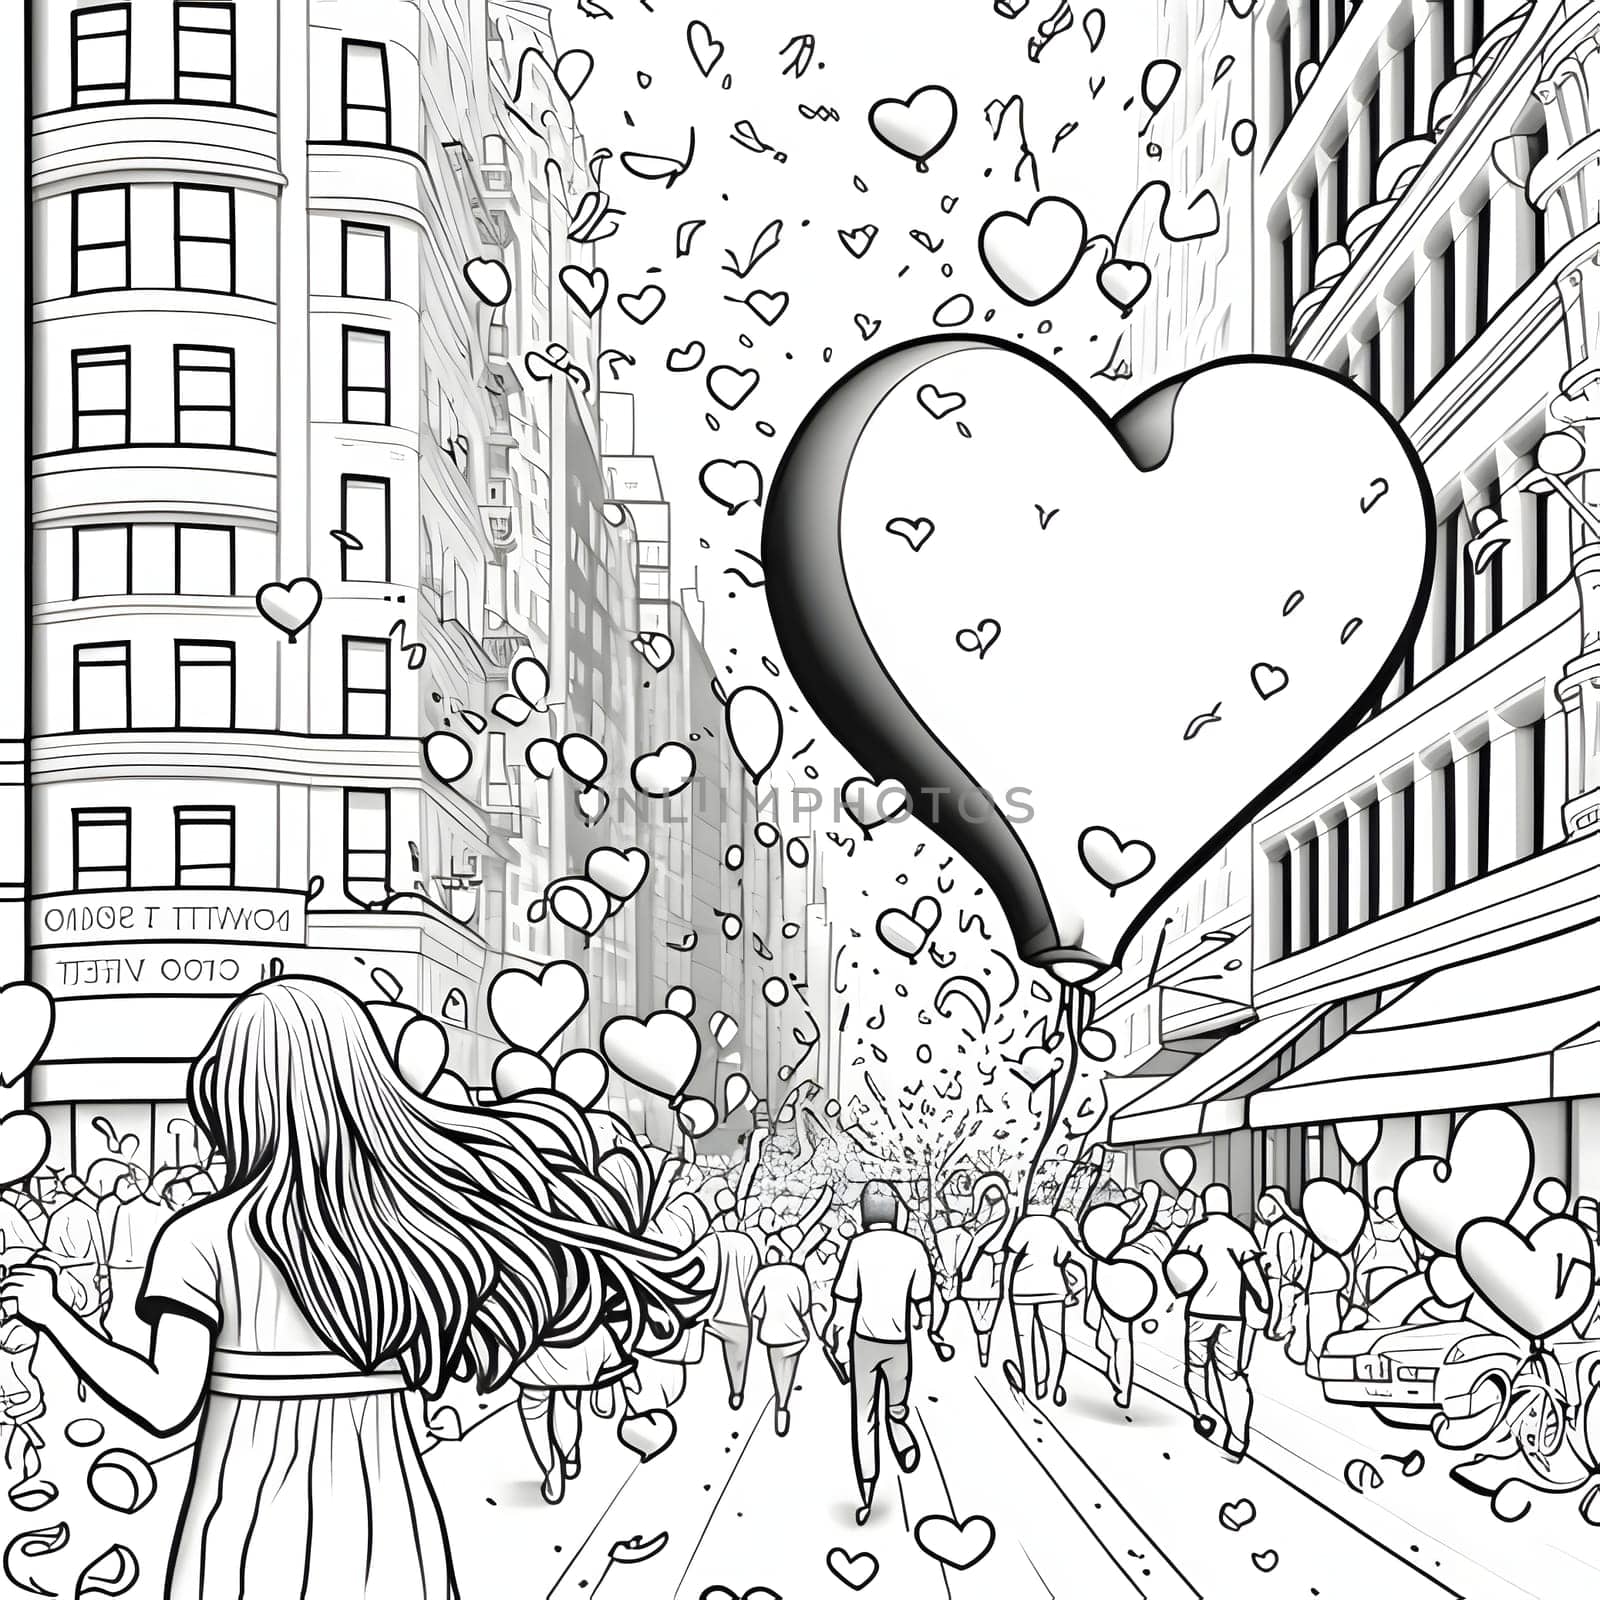 A giant heart, a crowd. People and confetti black and white coloring sheet. New Year's party and celebrations. A time of celebration and resolutions.